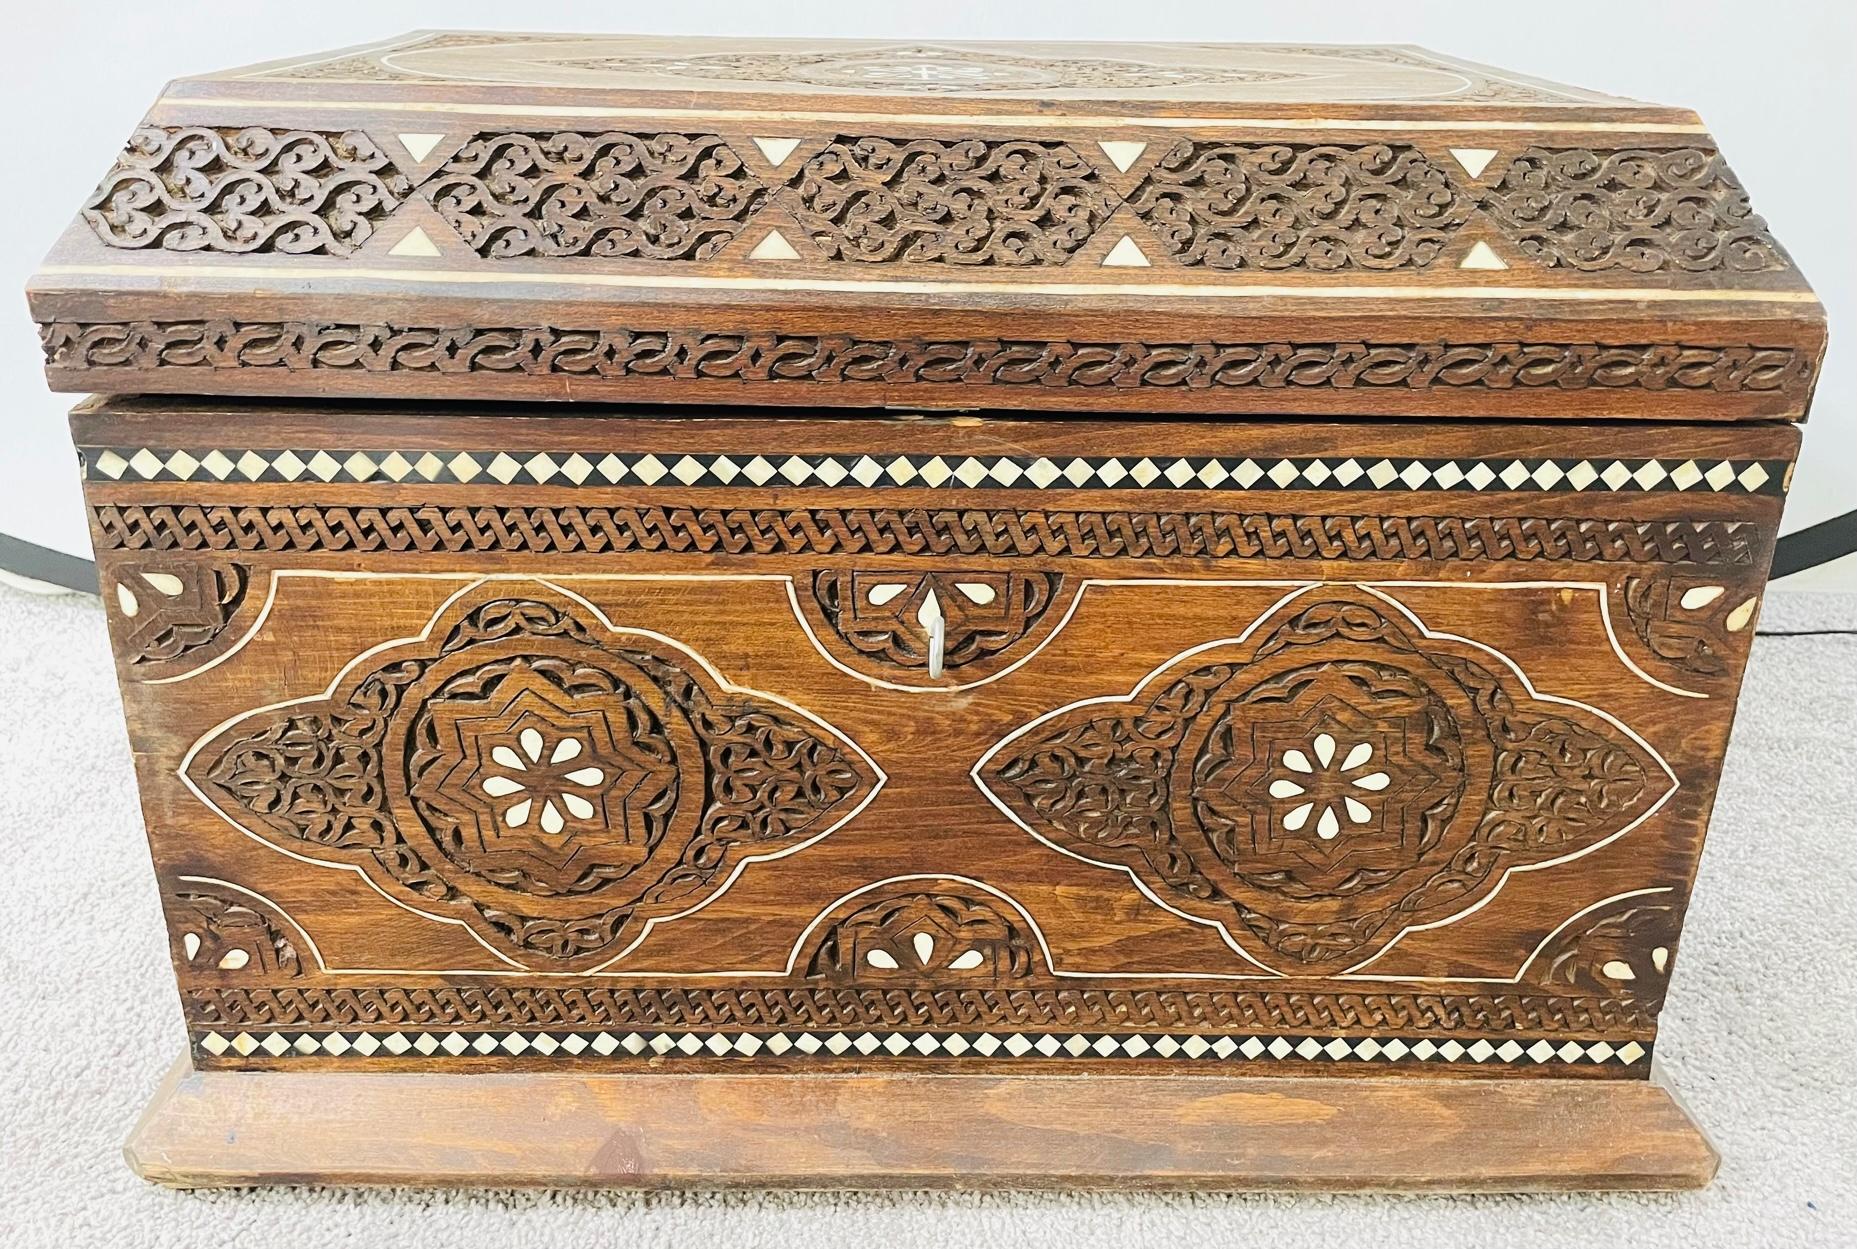 Moorish Vintage Moroccan Hand Crafted Storage or Dowry Chest